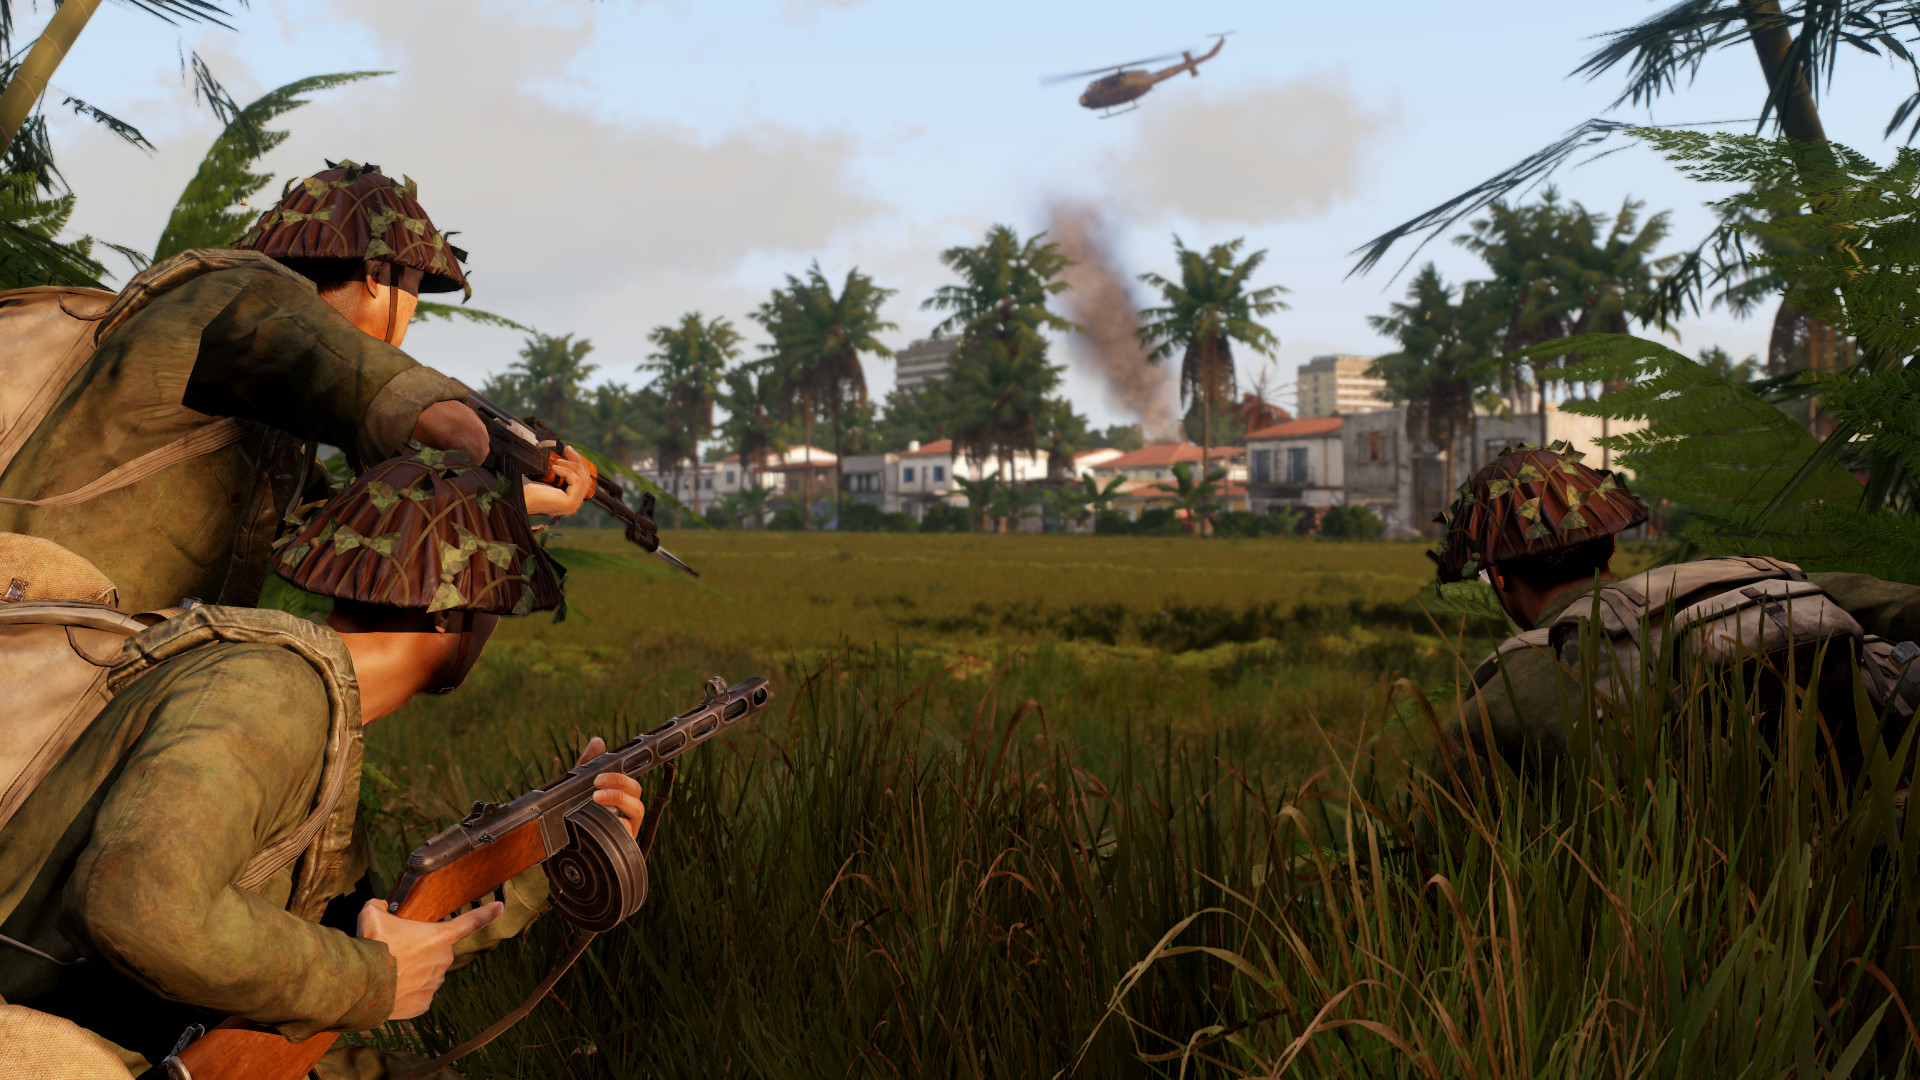 Join the Astra Militarum with this Arma 3 roleplay community